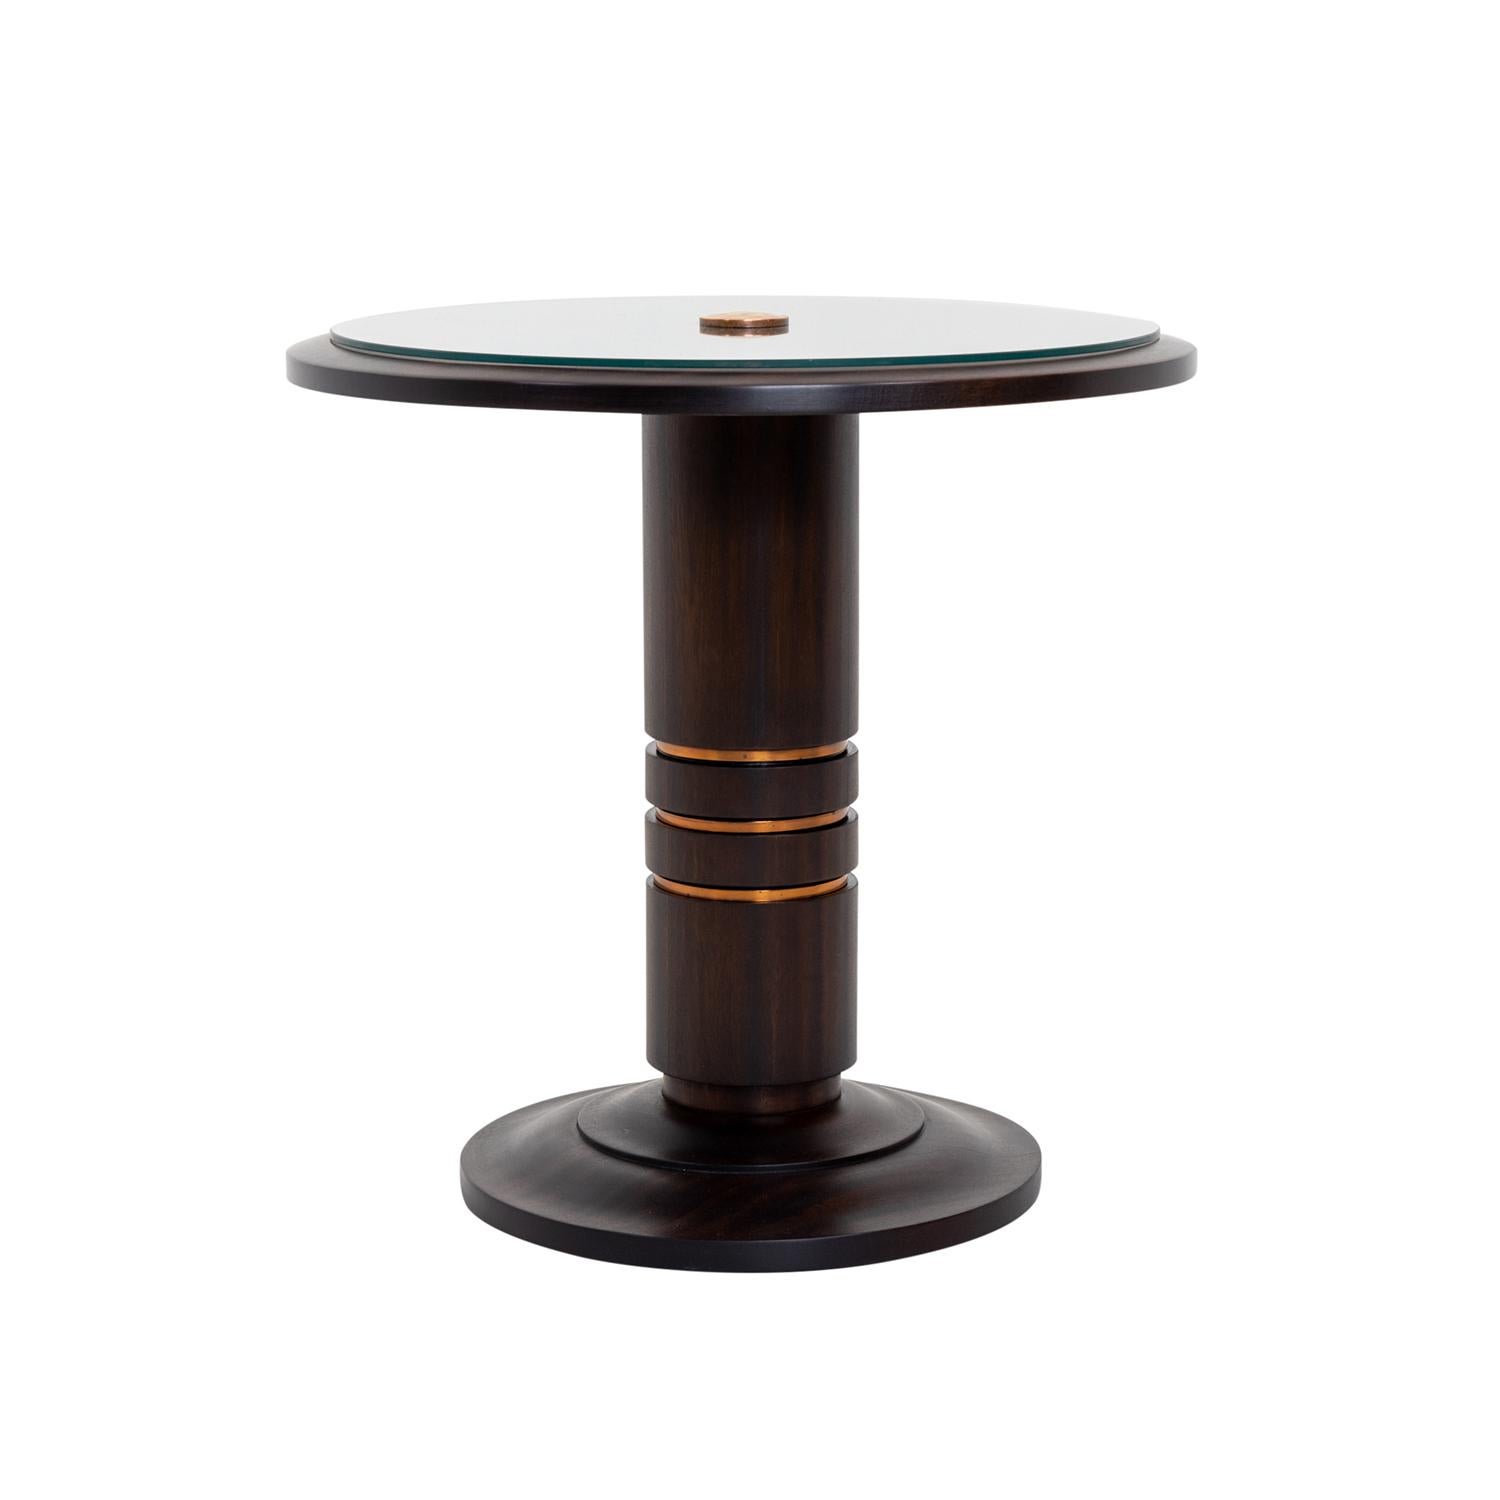 A round, vintage French Art Deco side, center table made of hand crafted shellac polished, partly veneered Honduran Mahogany in good condition. The detailed end table is composed with its original clear glass top which is halted by the slightly